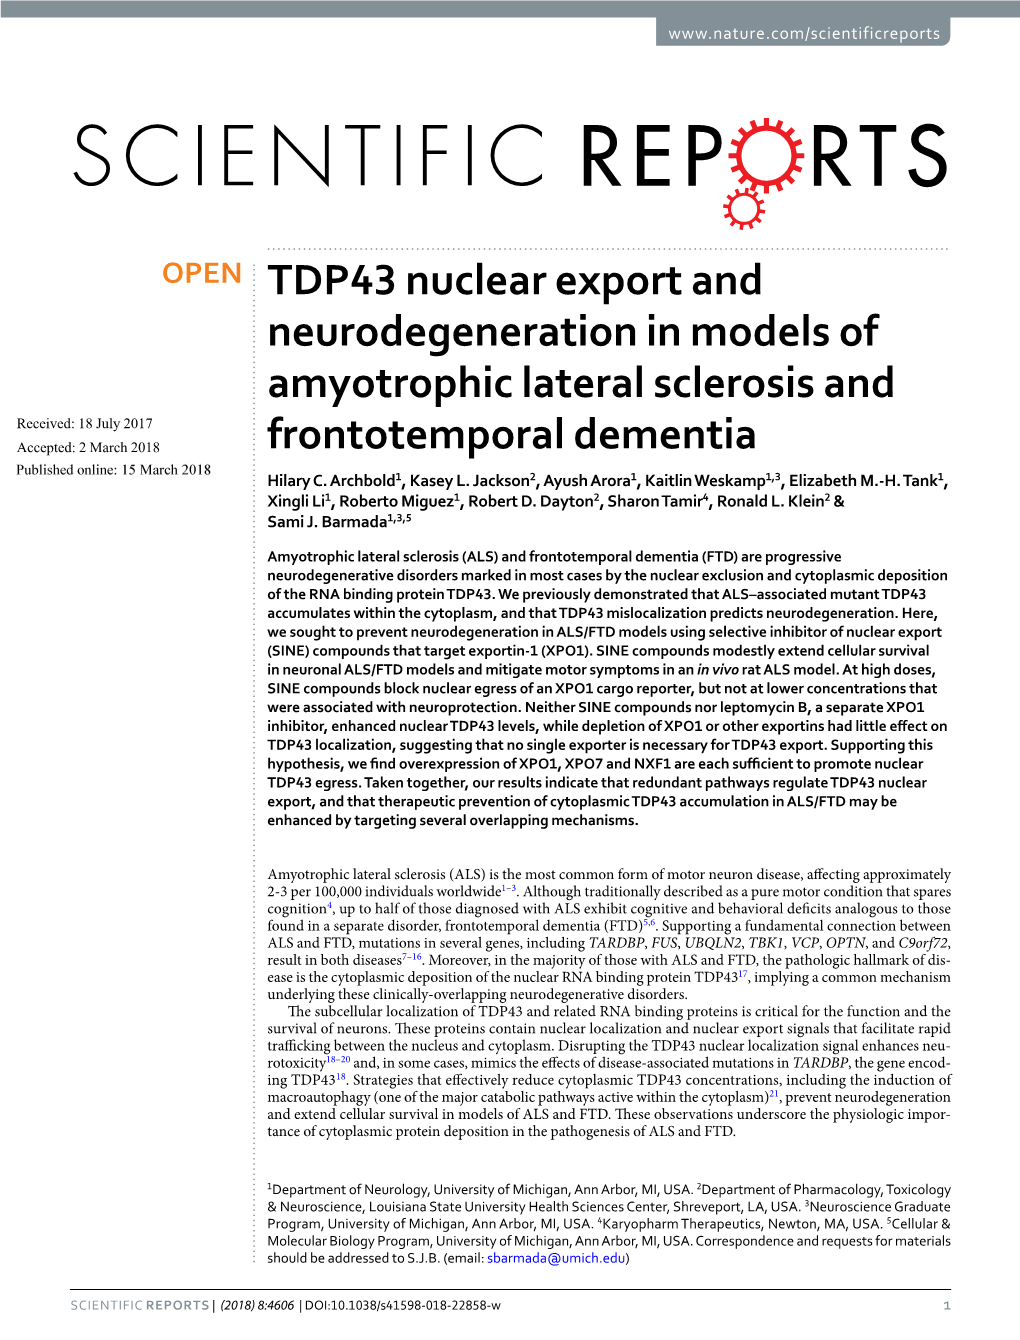 TDP43 Nuclear Export and Neurodegeneration in Models of Amyotrophic Lateral Sclerosis and Frontotemporal Dementia